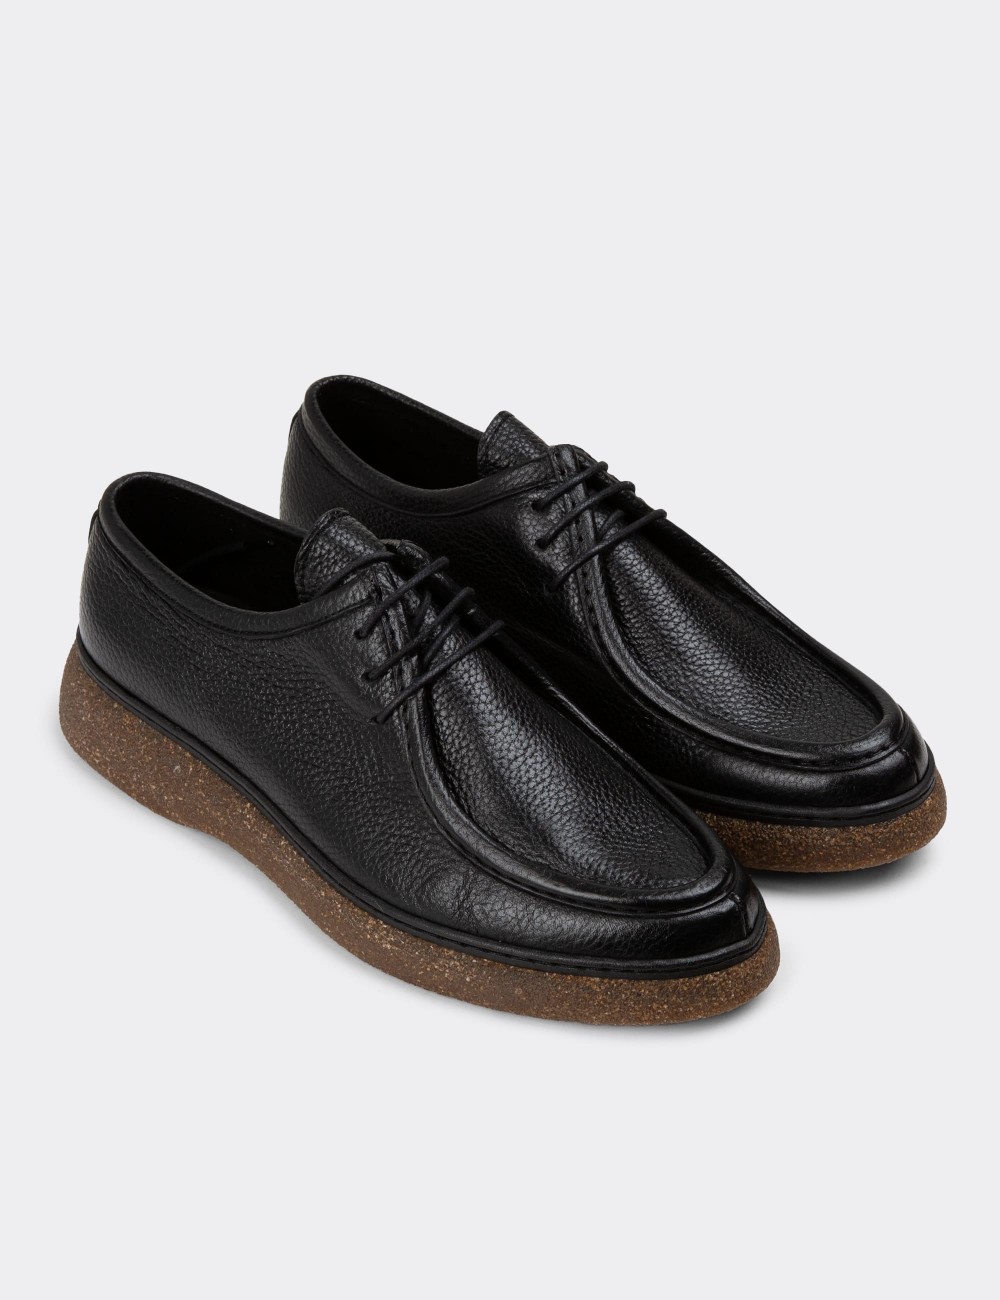 Black Leather Lace-up Shoes - 01927MSYHC02